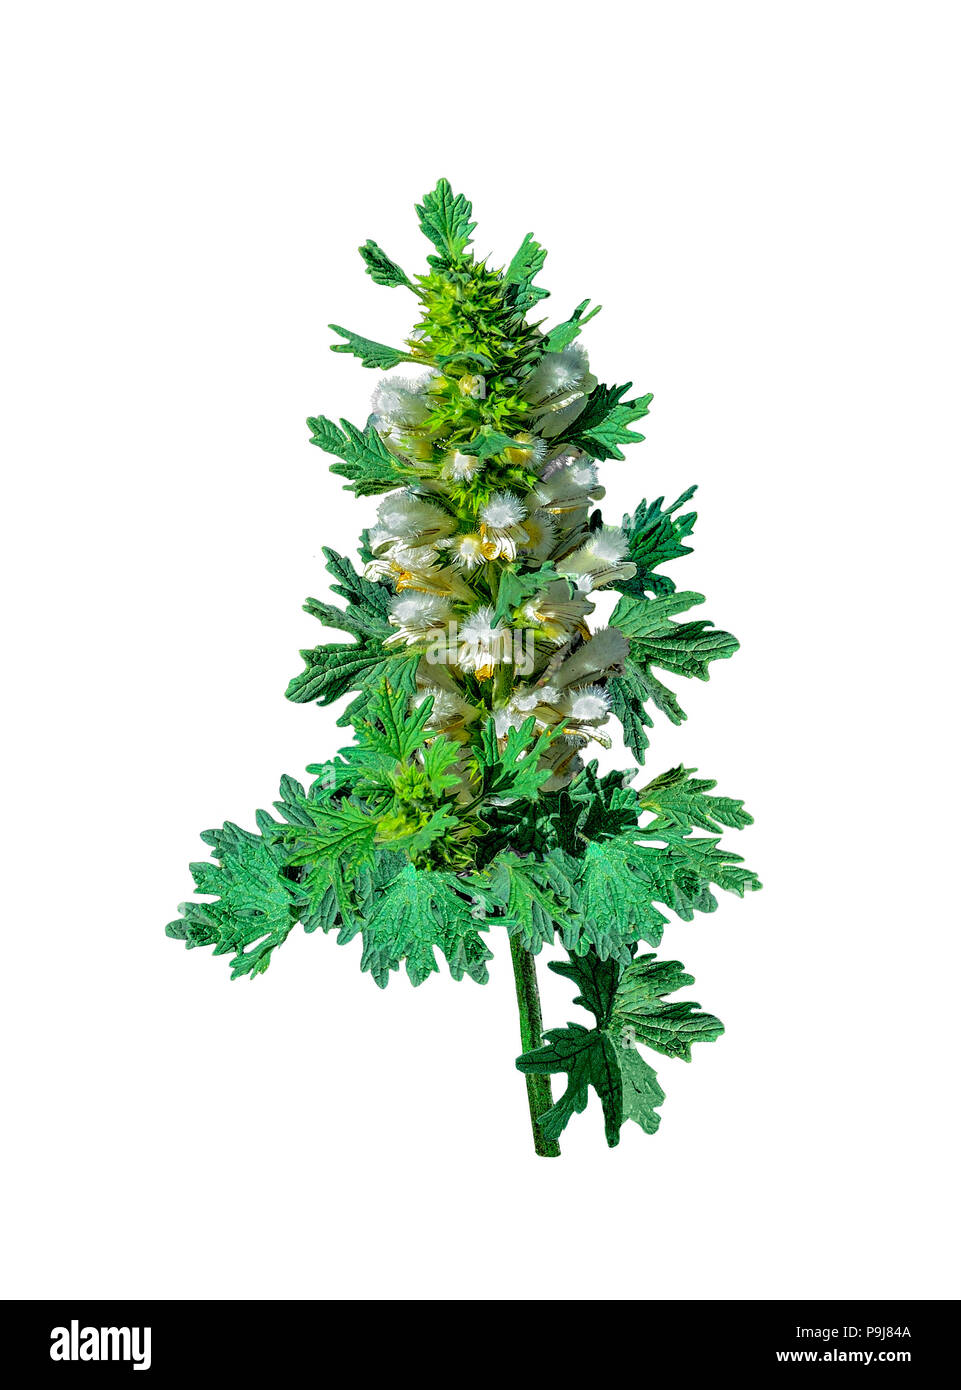 Blooming motherwort or Leonurus cardiaca - medicinal plant on a white background isolated. Other names: throw-wort, lion's ear, and lion's tail, raw m Stock Photo